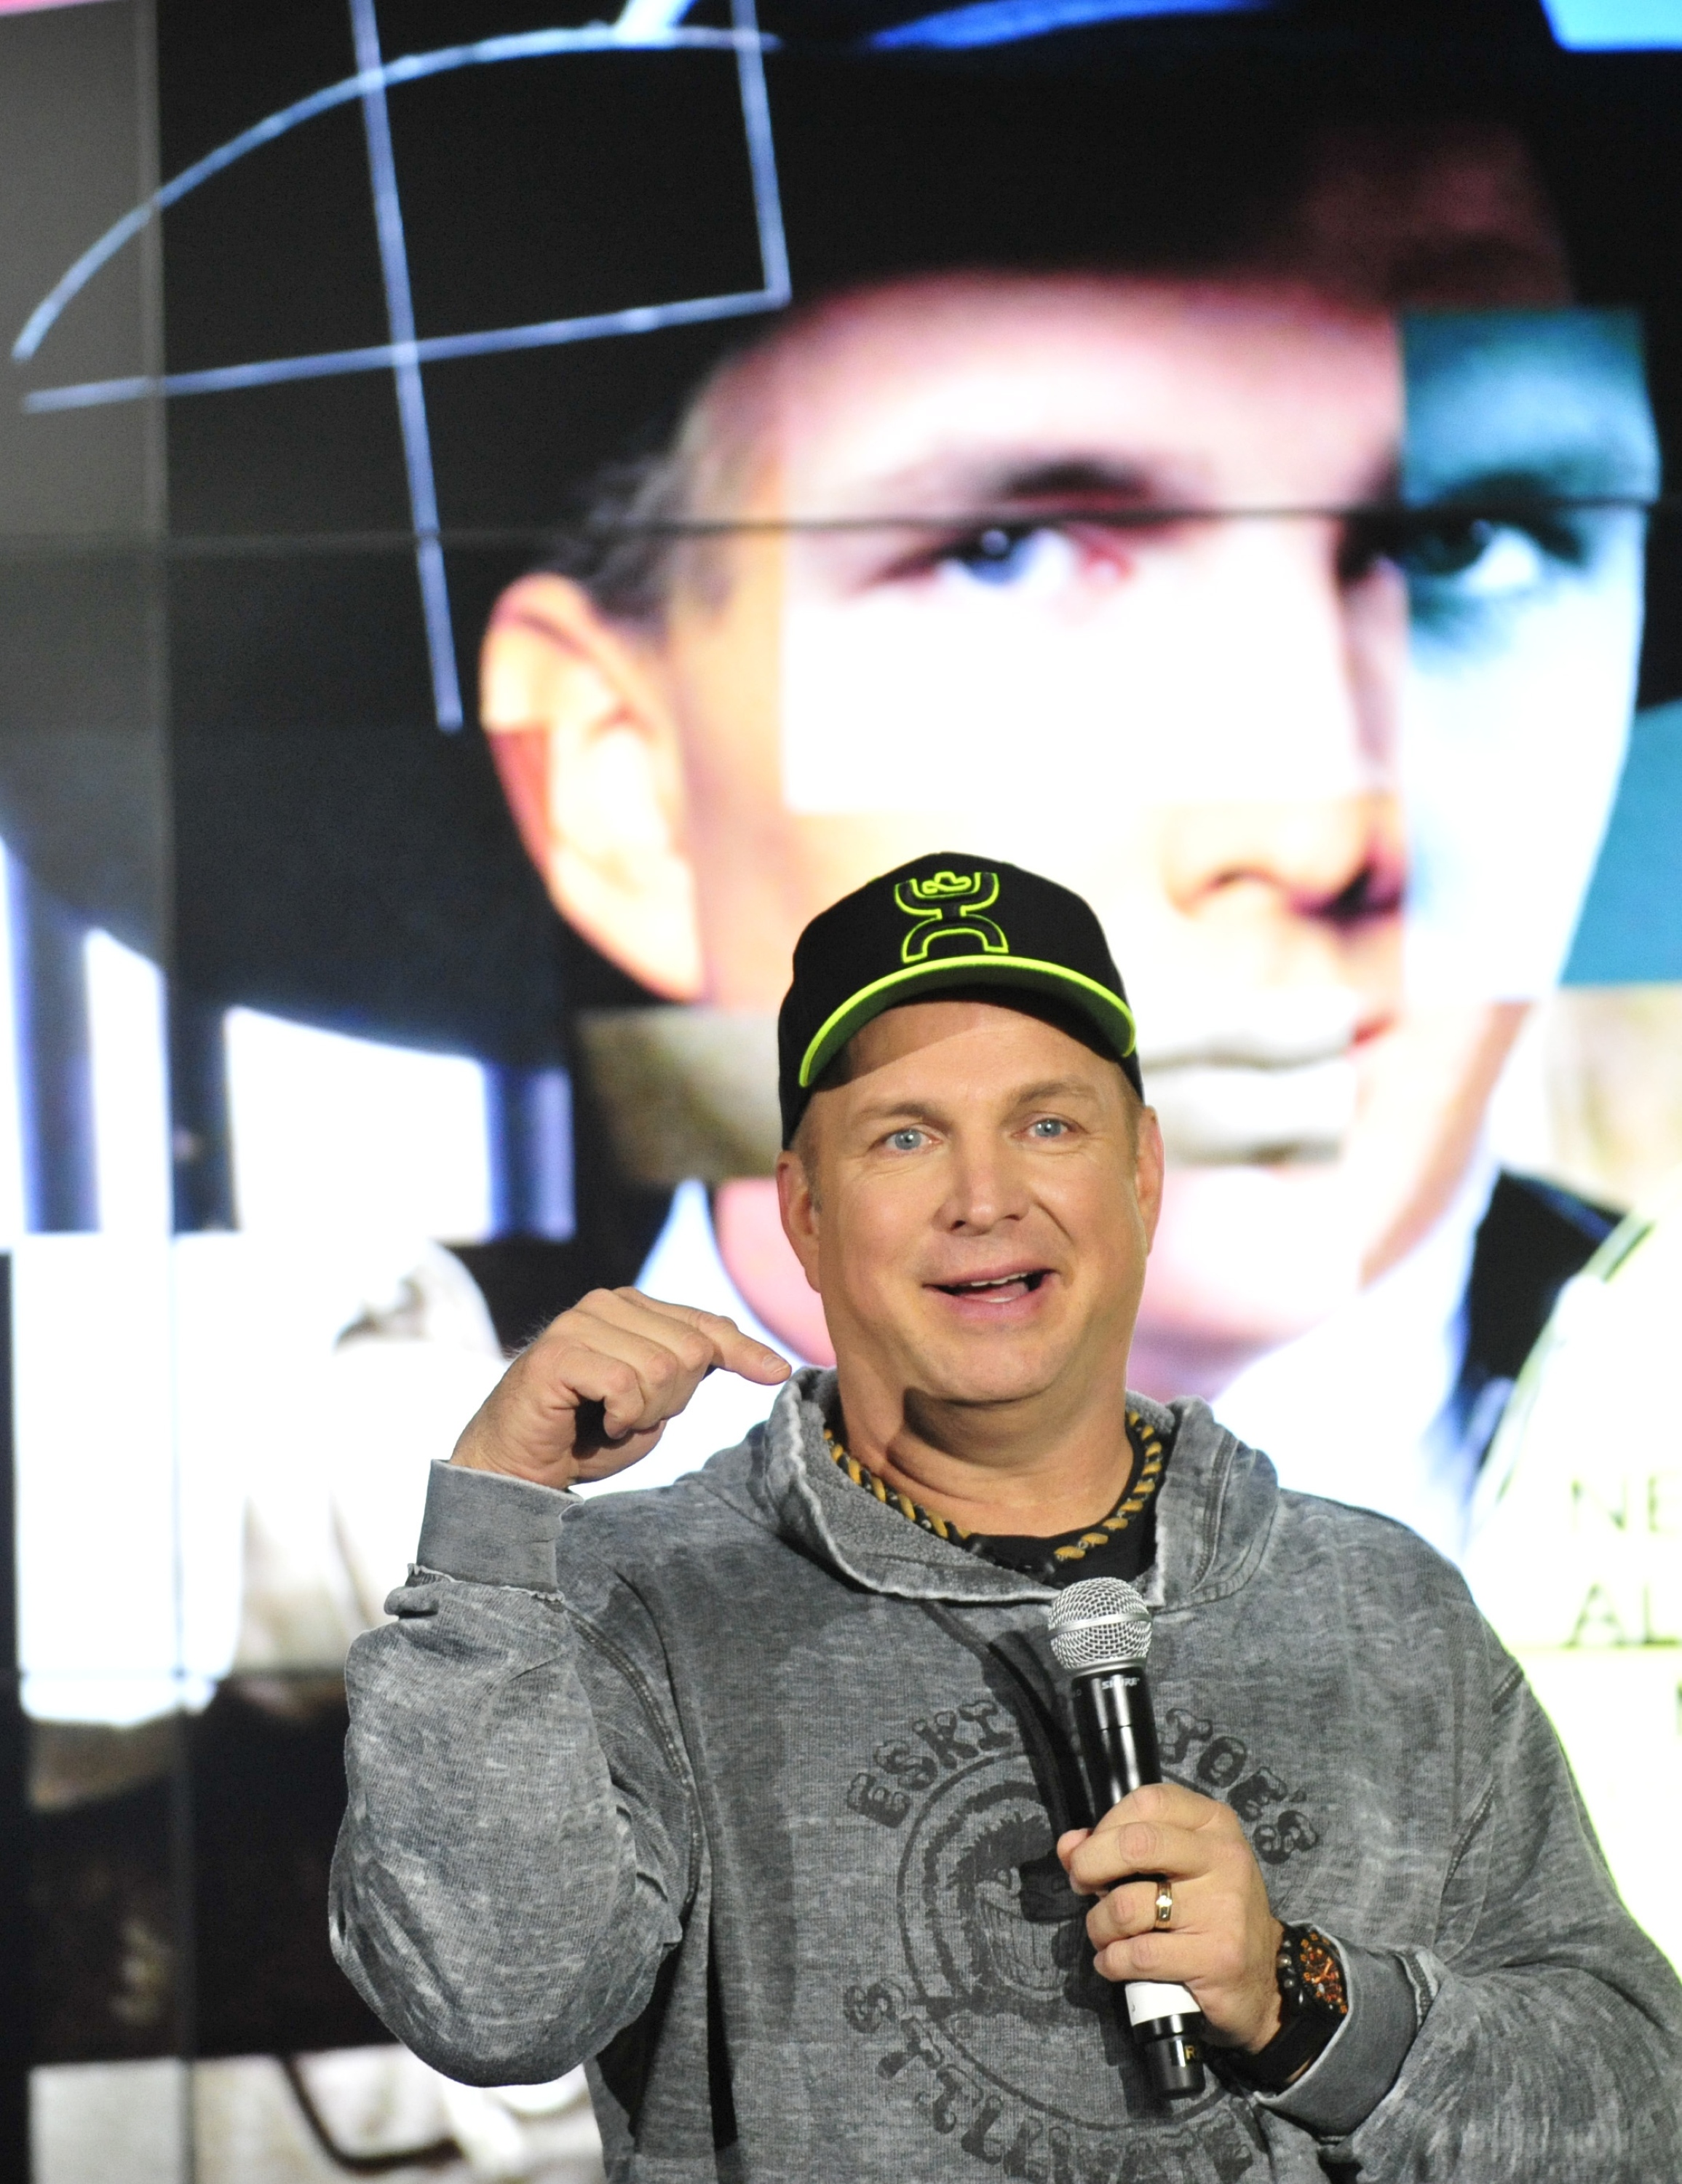 Garth Brooks in Rosemont, Illinois. (Photo by David Banks/Getty Images)